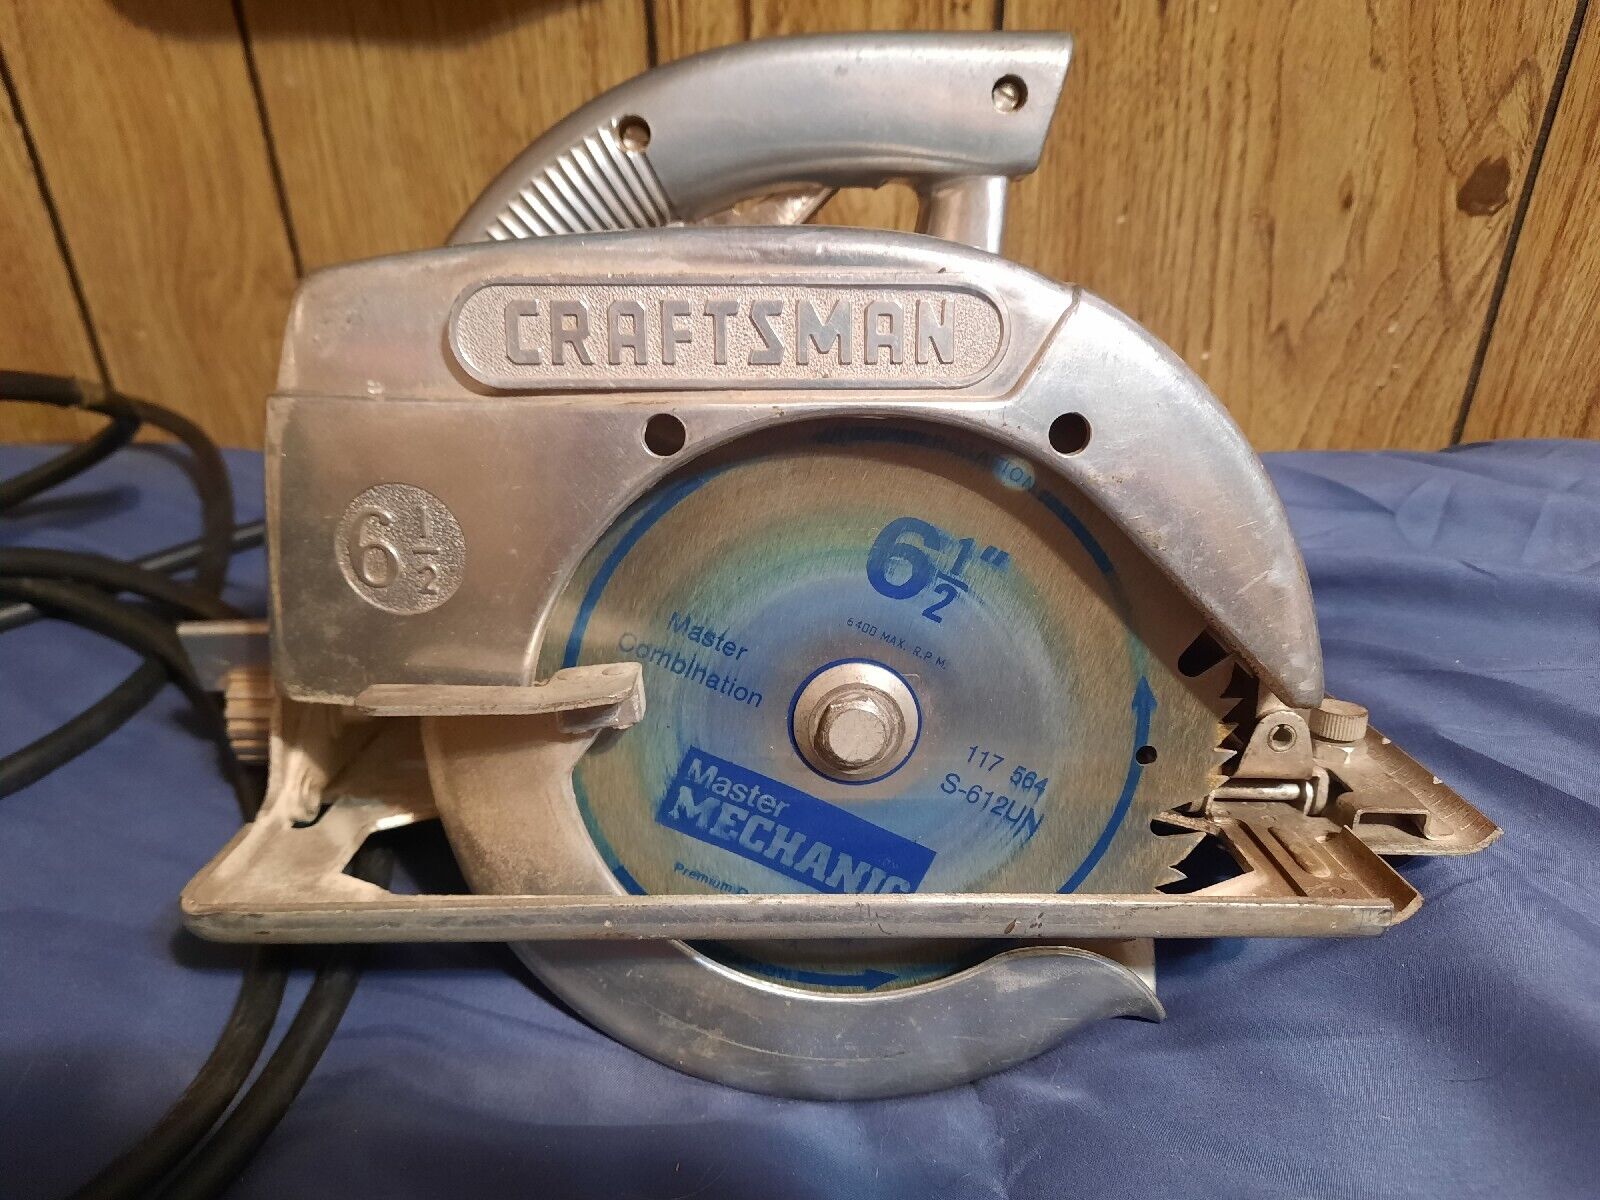 Vintage Craftsman 6 1/2 Table Electric Hand Saw 1959 Sears Model No. 336.27963